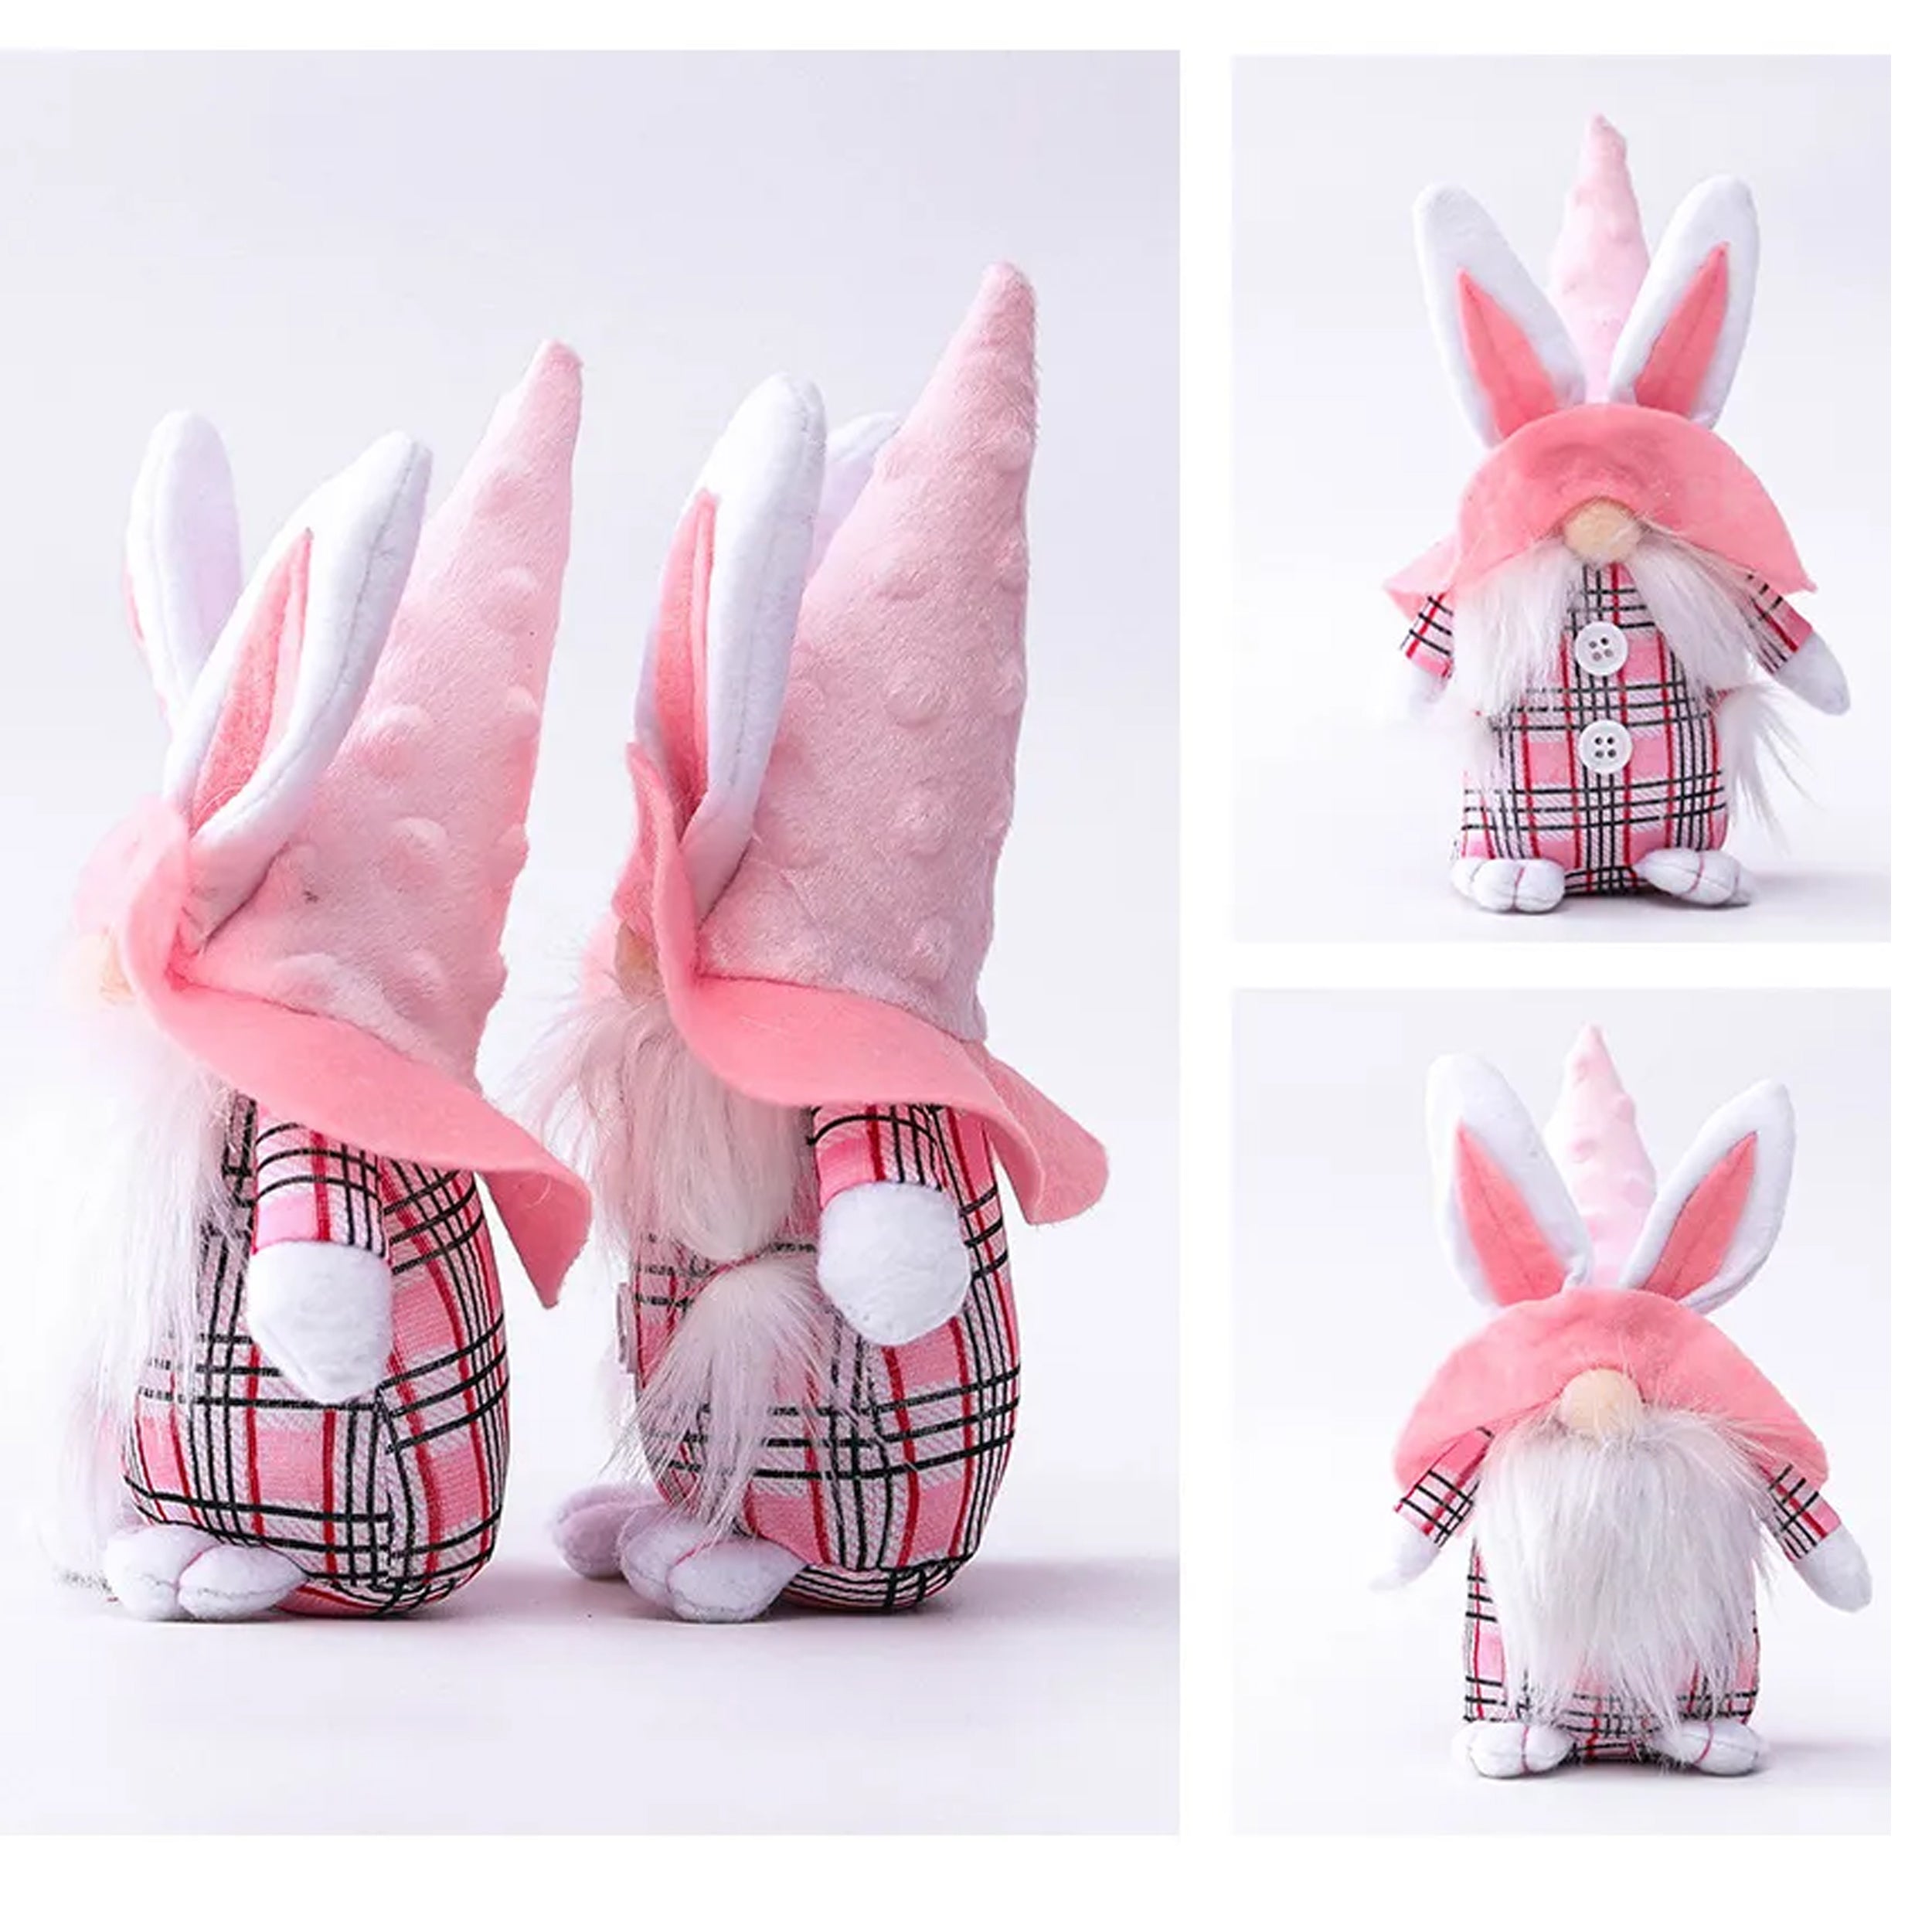 Add a Touch of Whimsy to Your Easter with Faceless Gnome Easter Plush Doll - Perfect for Gifts and Decorations